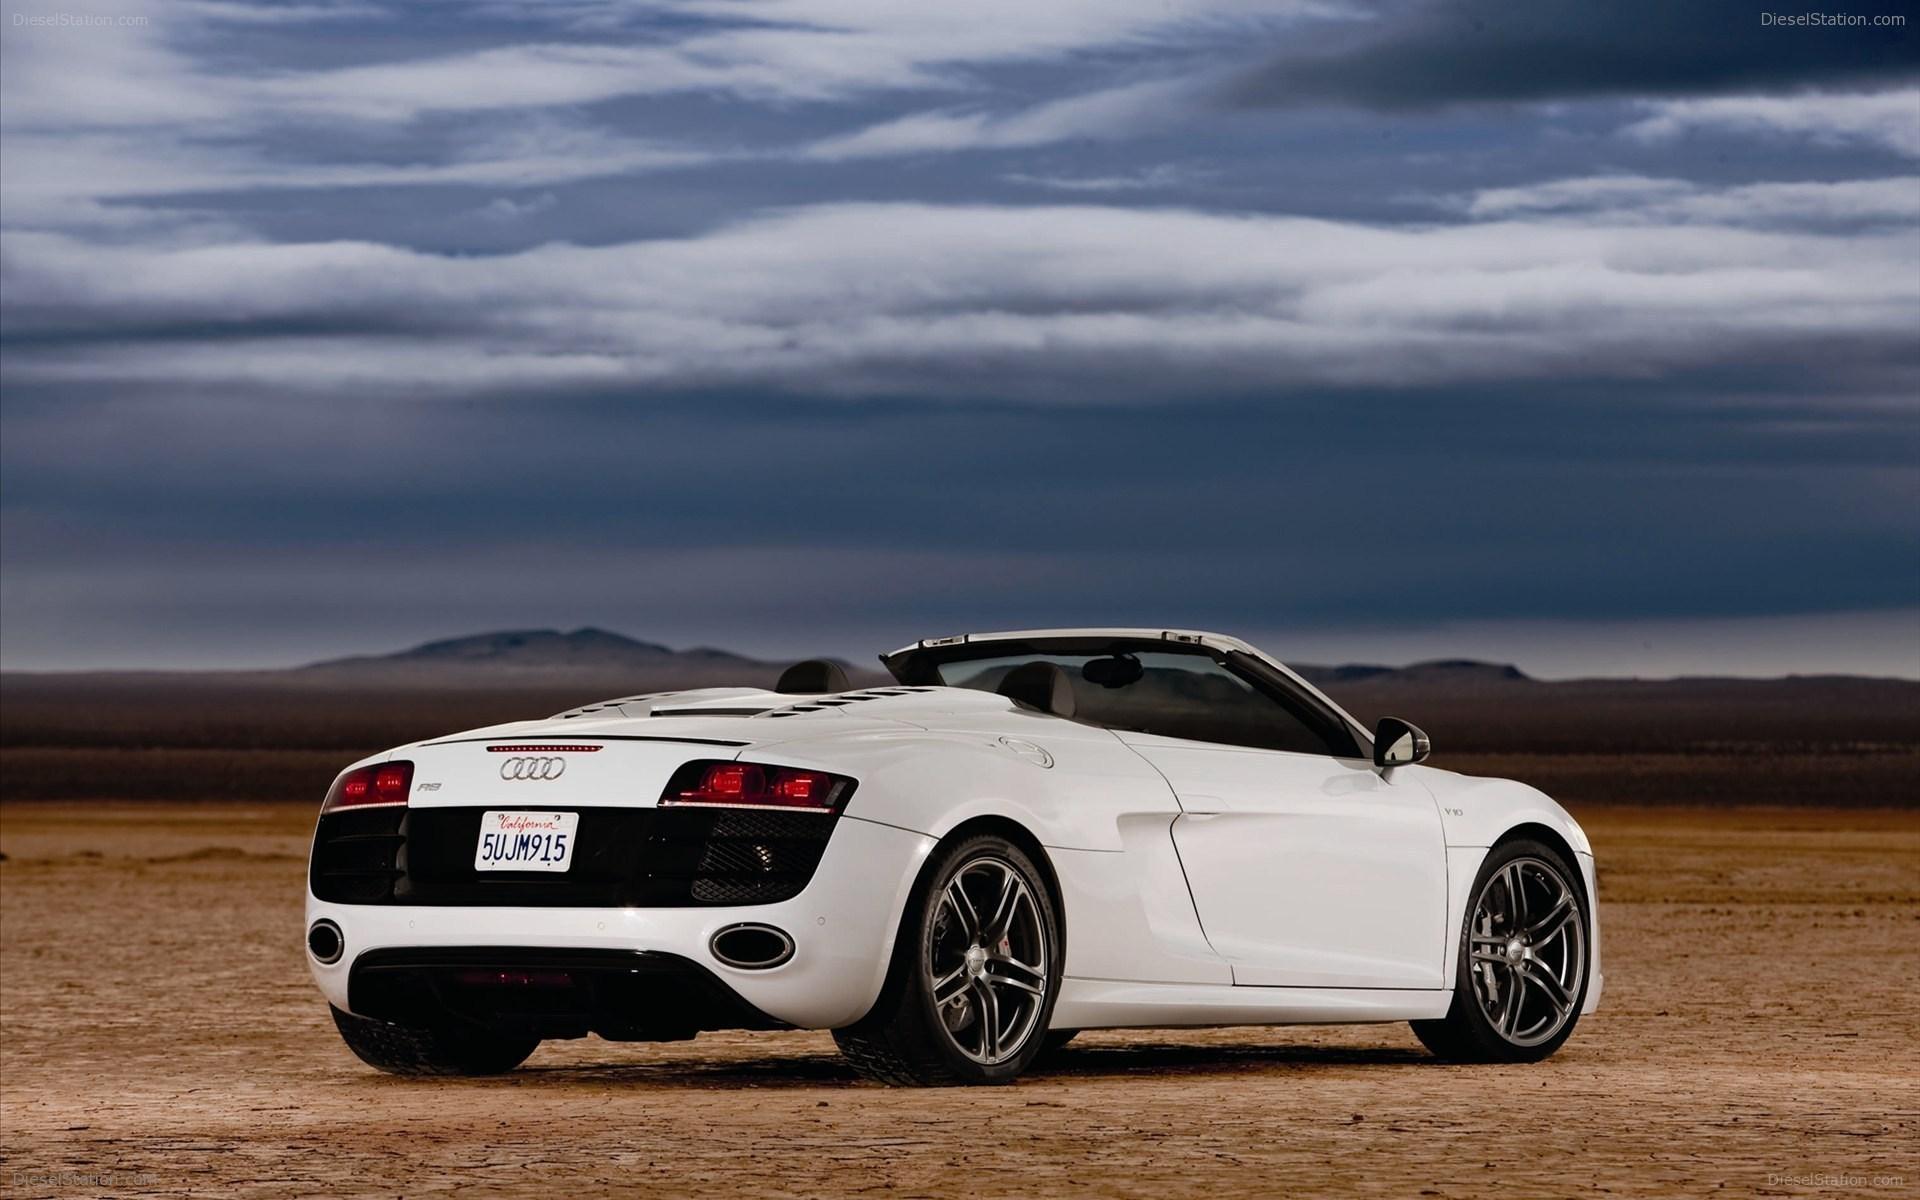 Audi R8 Spyder Wallpaper Group With 55 Items A8 Free Download